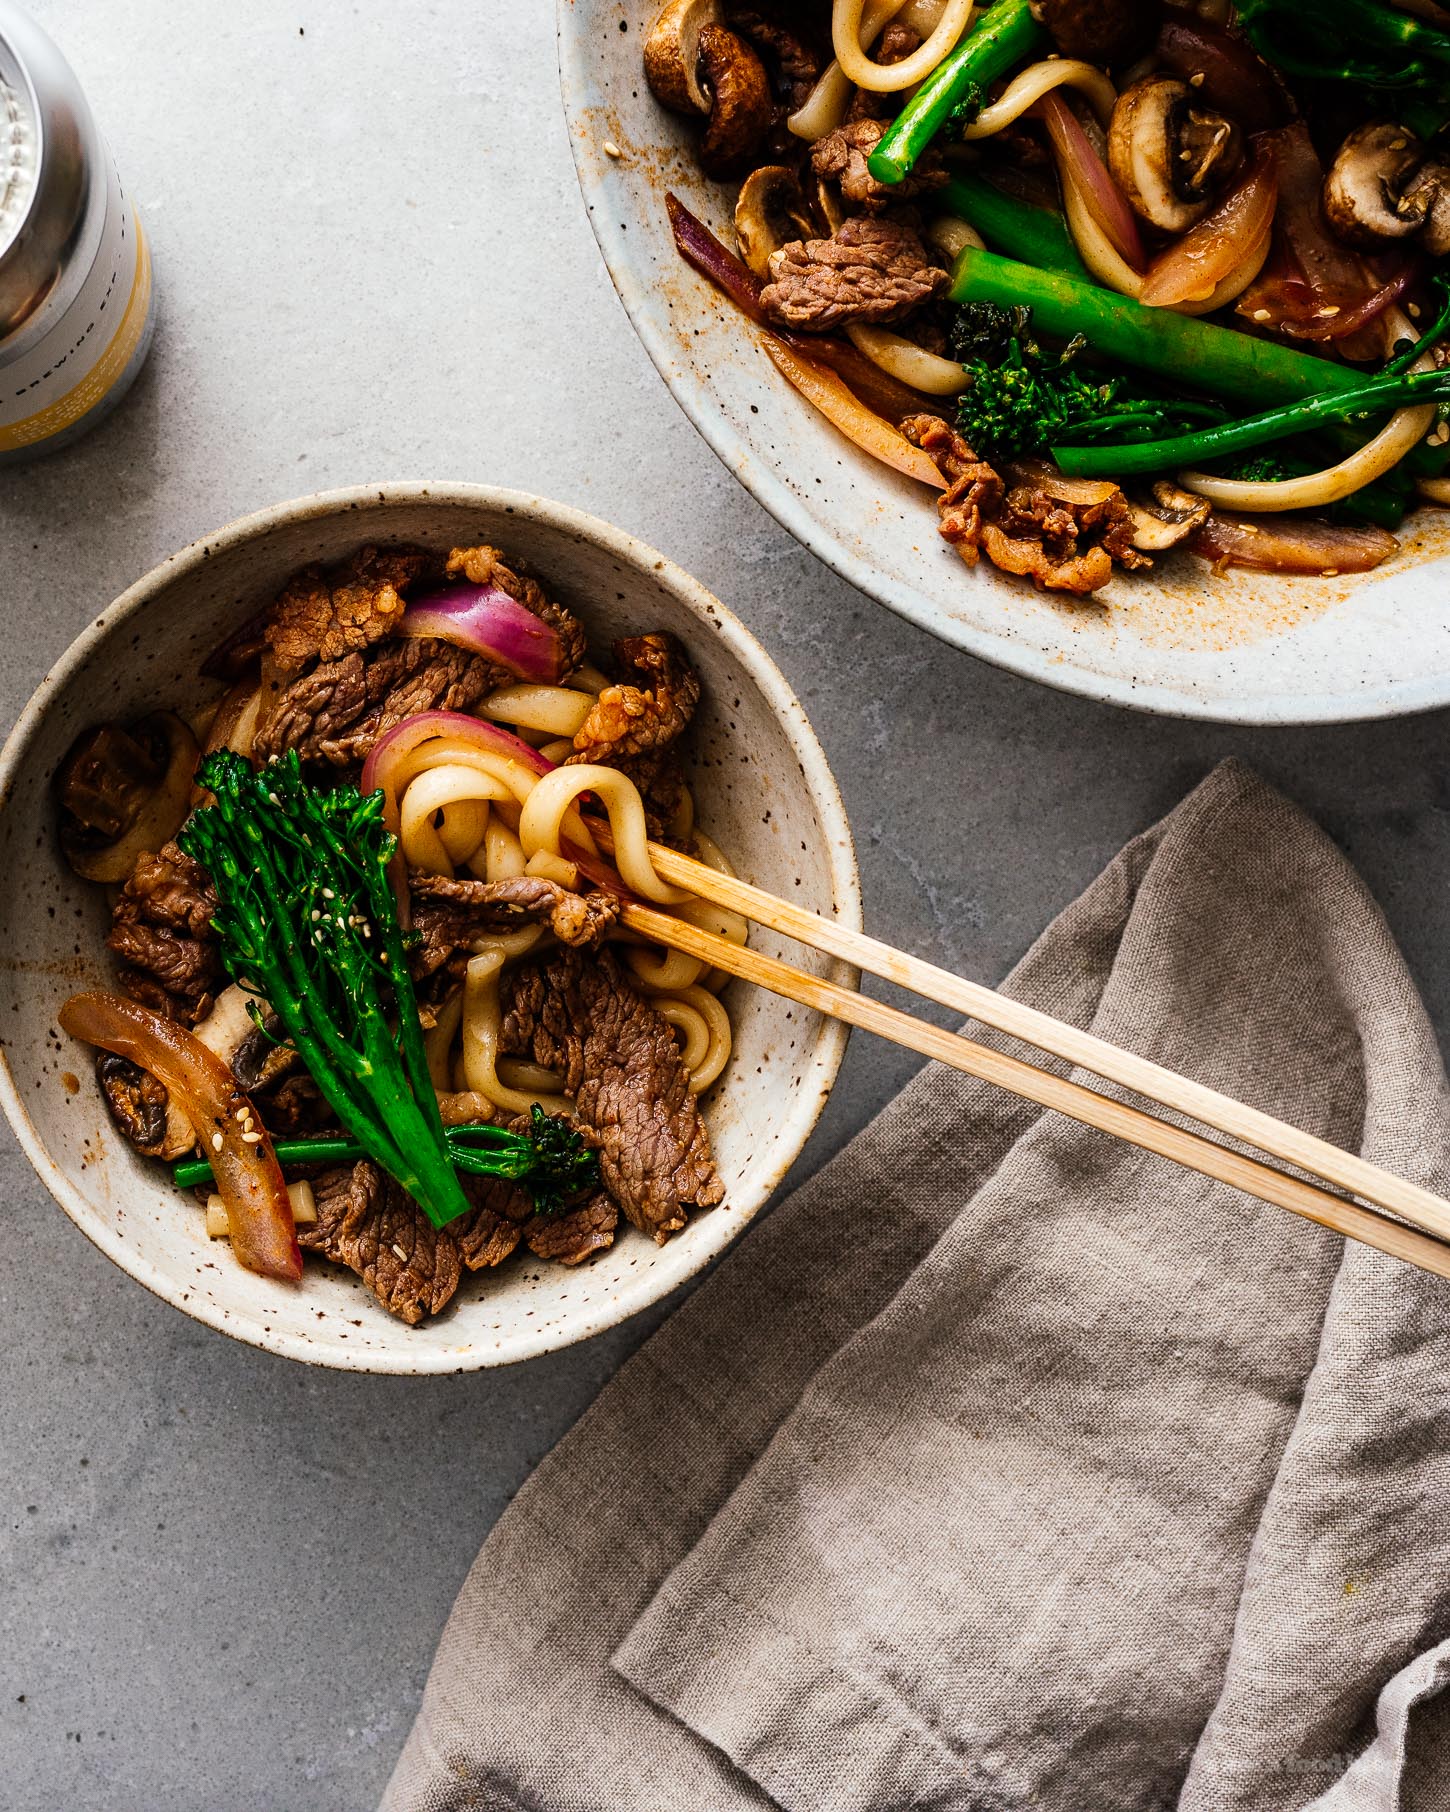 This is a weeknight stir fry udon based on japanese spicy beef that comes together easily and quickly in only 10 minutes. It's spicy, savory, and irresistably delicious. You'll never believe it only has 8 ingredients. #udon #weeknight #stirfry